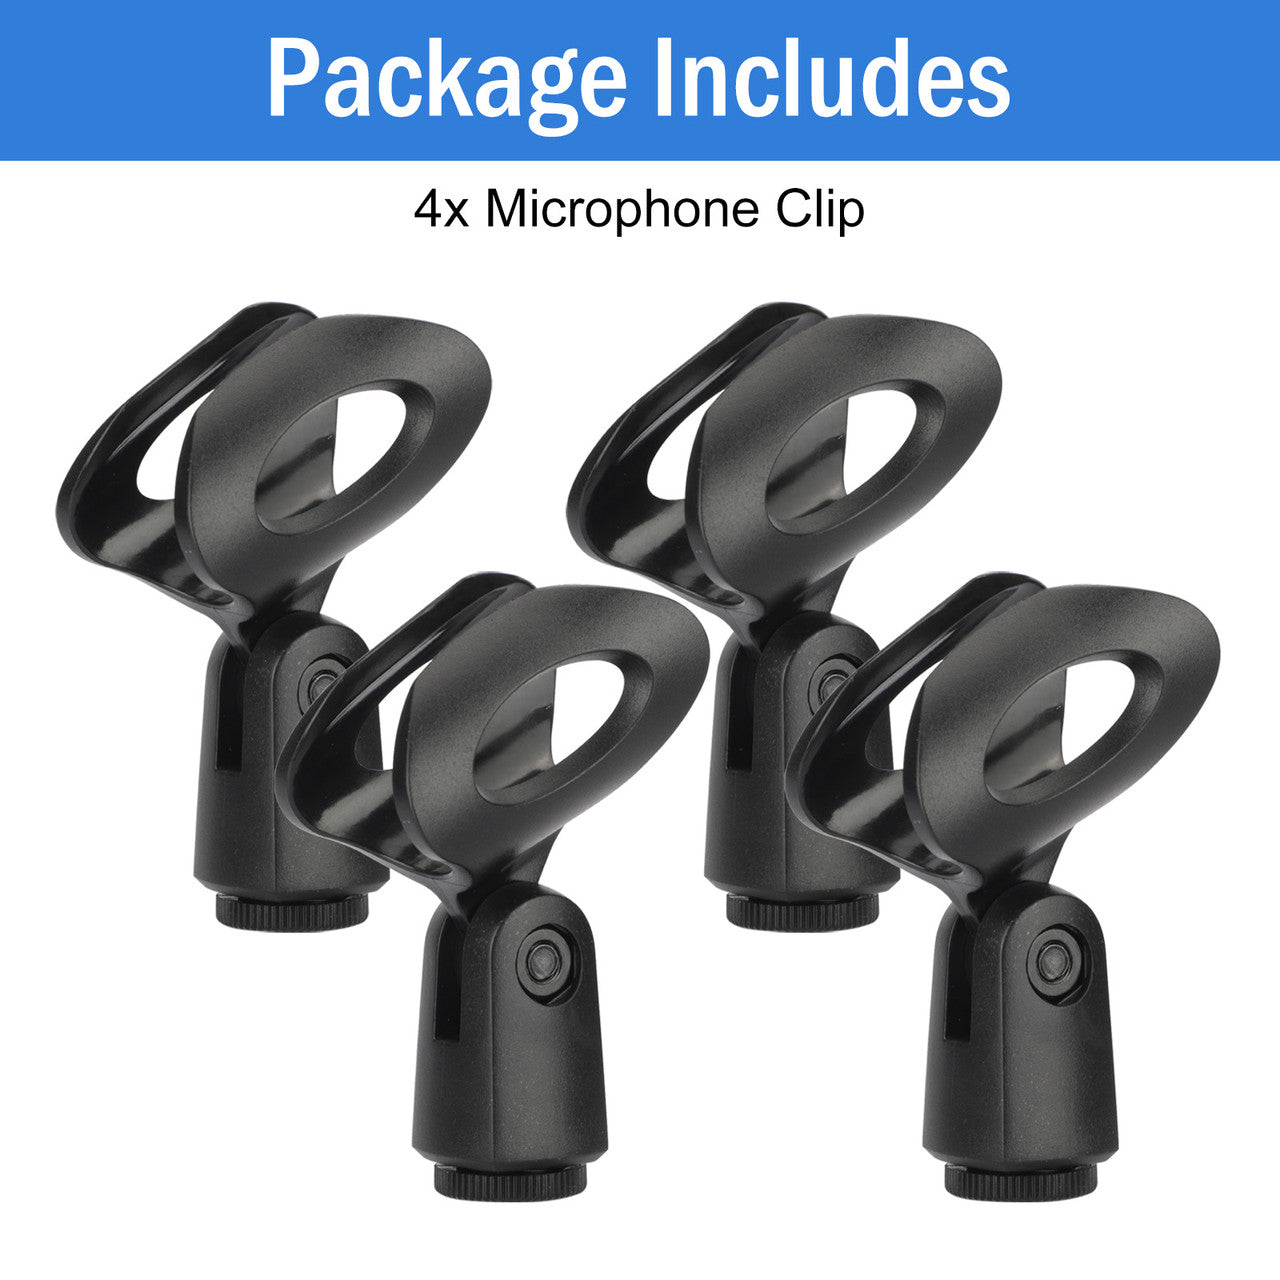 Microphone Clip with Male to Female Nut Adapters, Universal for All Handheld Transmitters, 4-pack